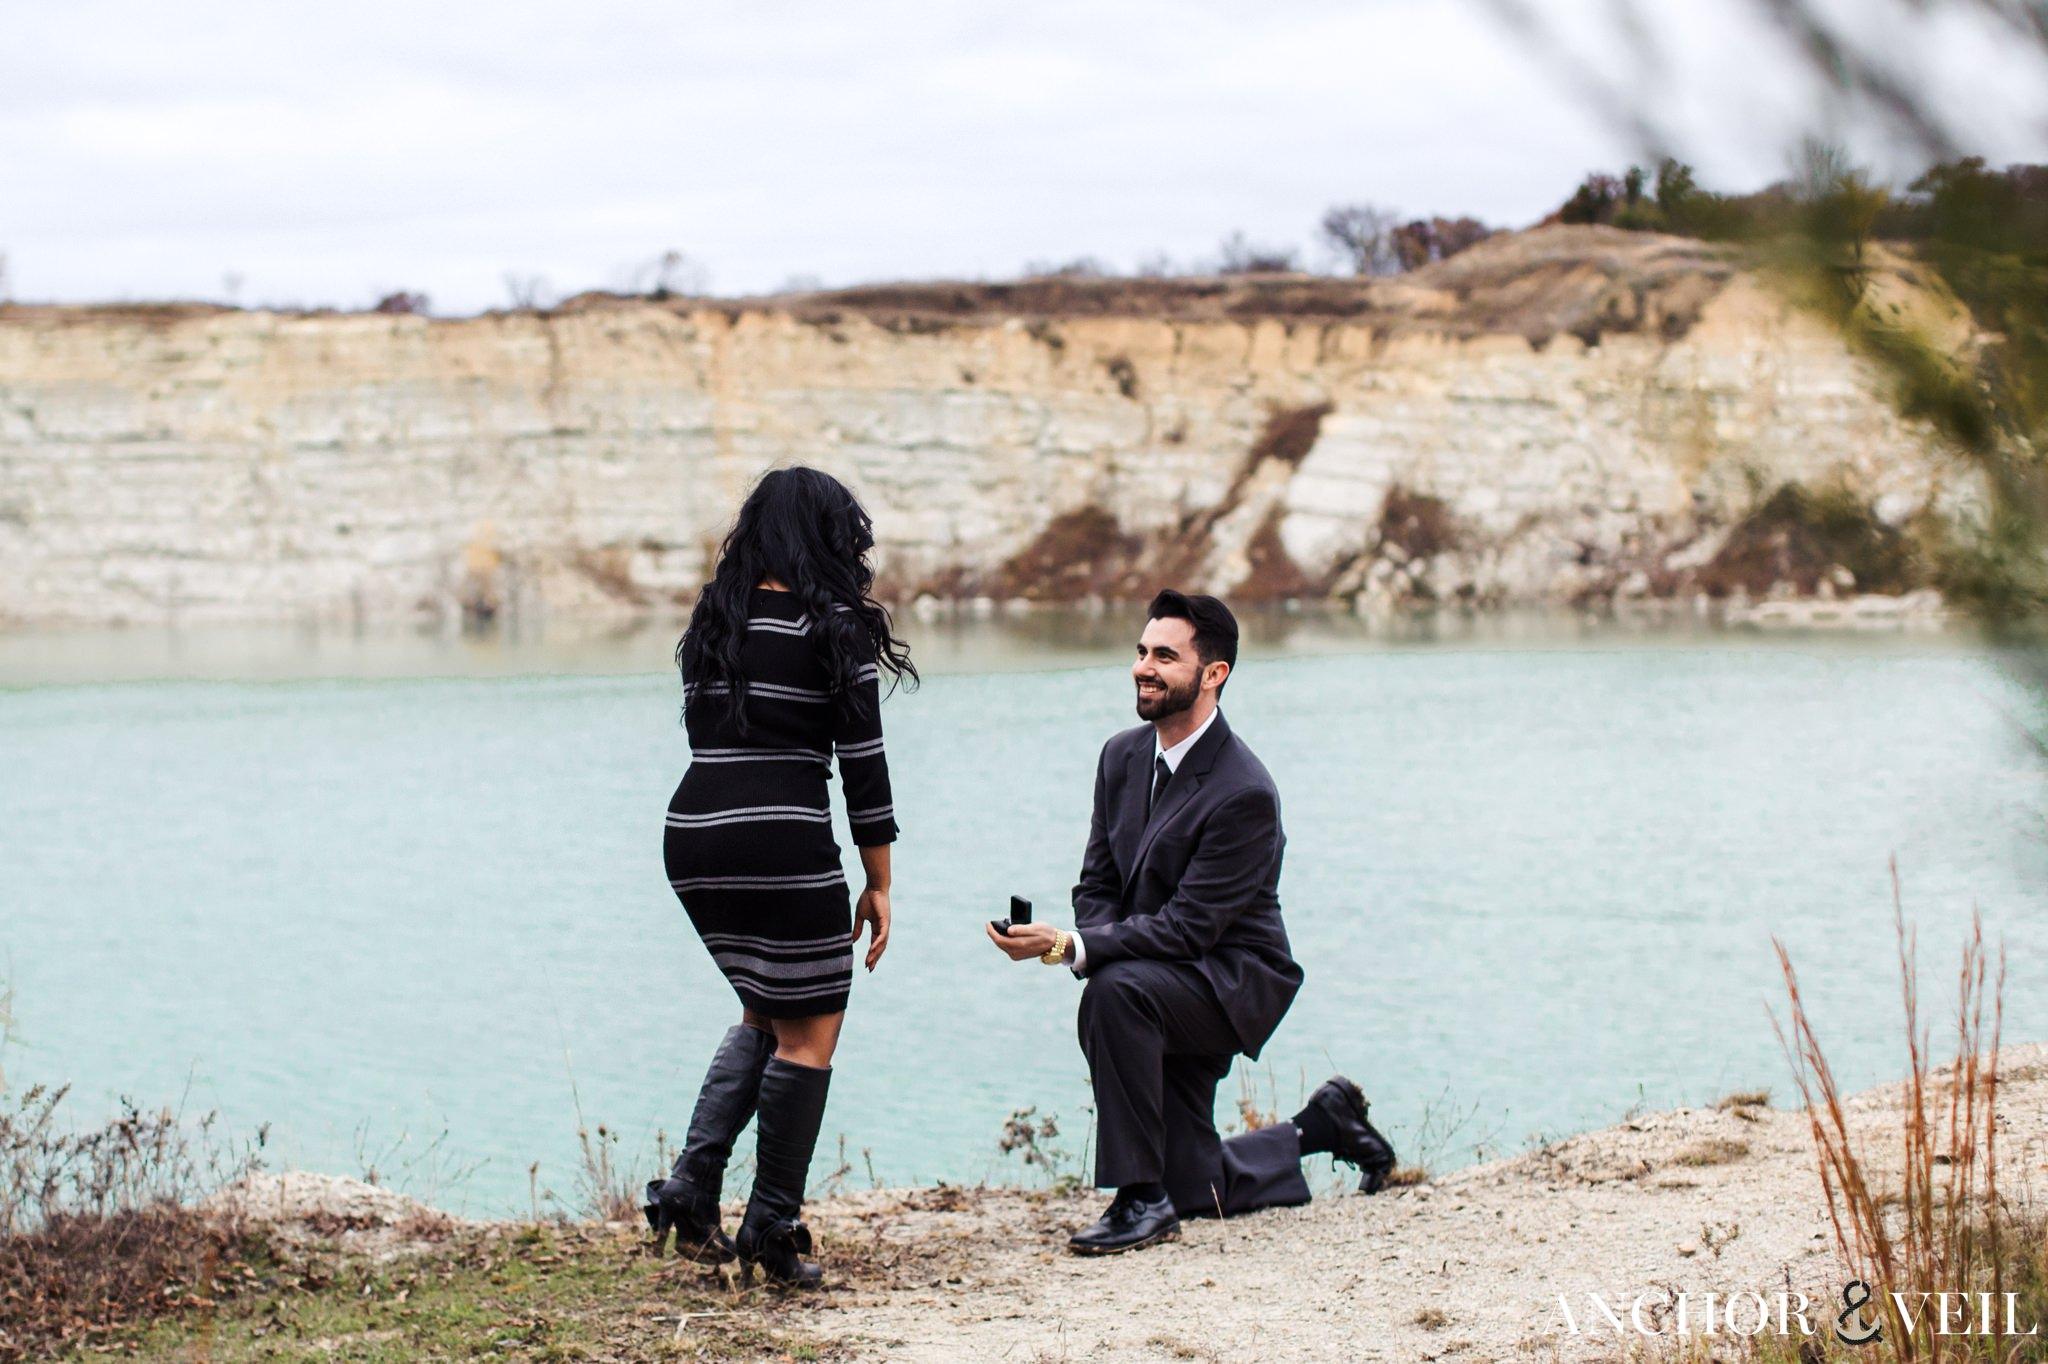 proposing uld most likely SAFELY put you on those rocks for some epic pics haha! 